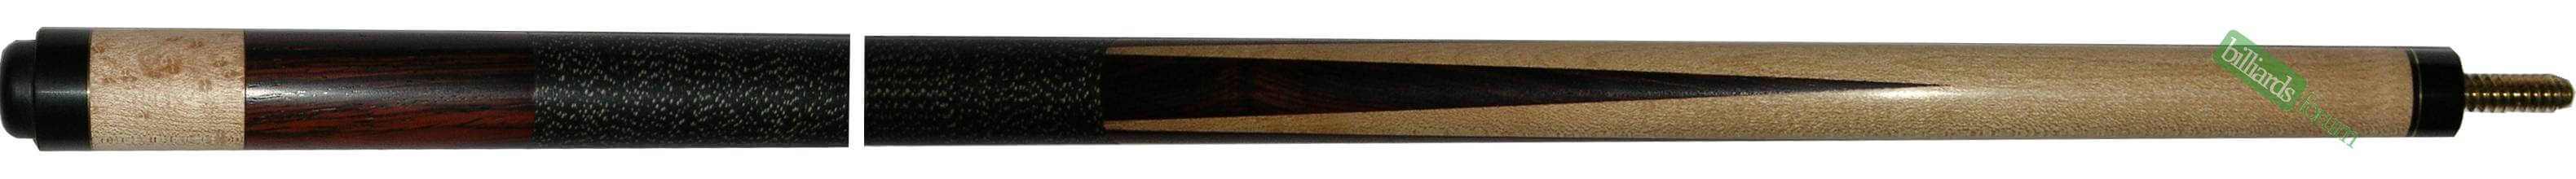 2004 Bob Harris Custom Cocobolo and Maple playing cue.